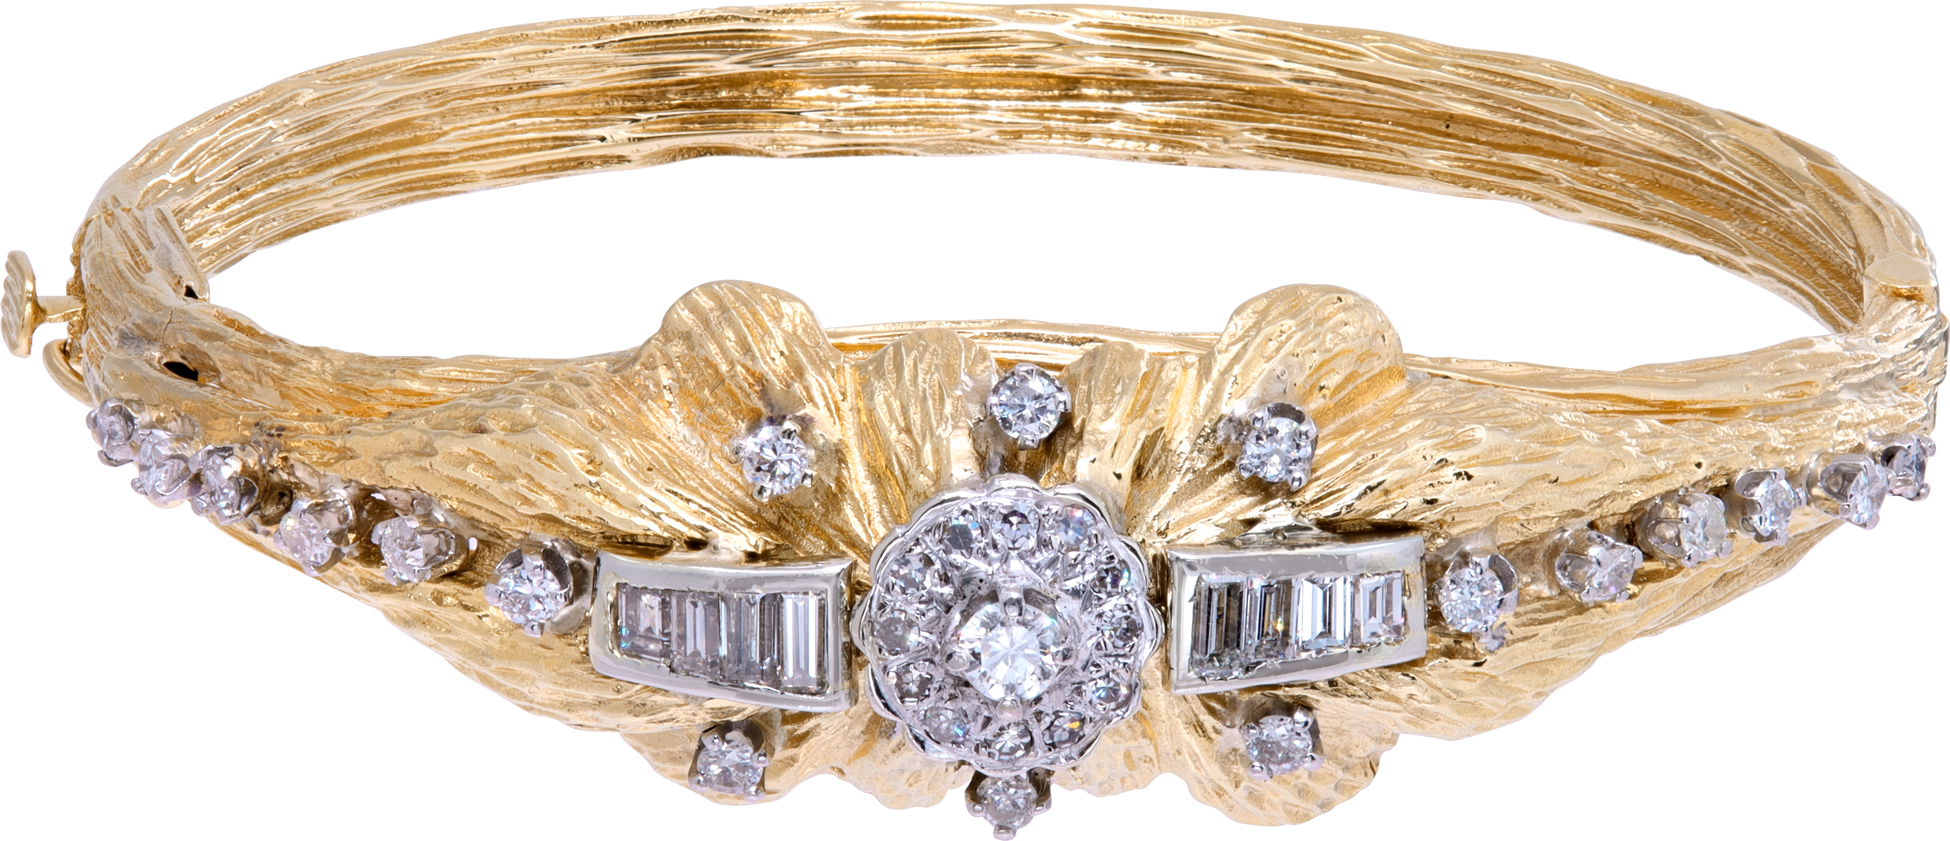 Diamond bangle with bark finish. 1.50 carats in round and baguette diamonds image 1